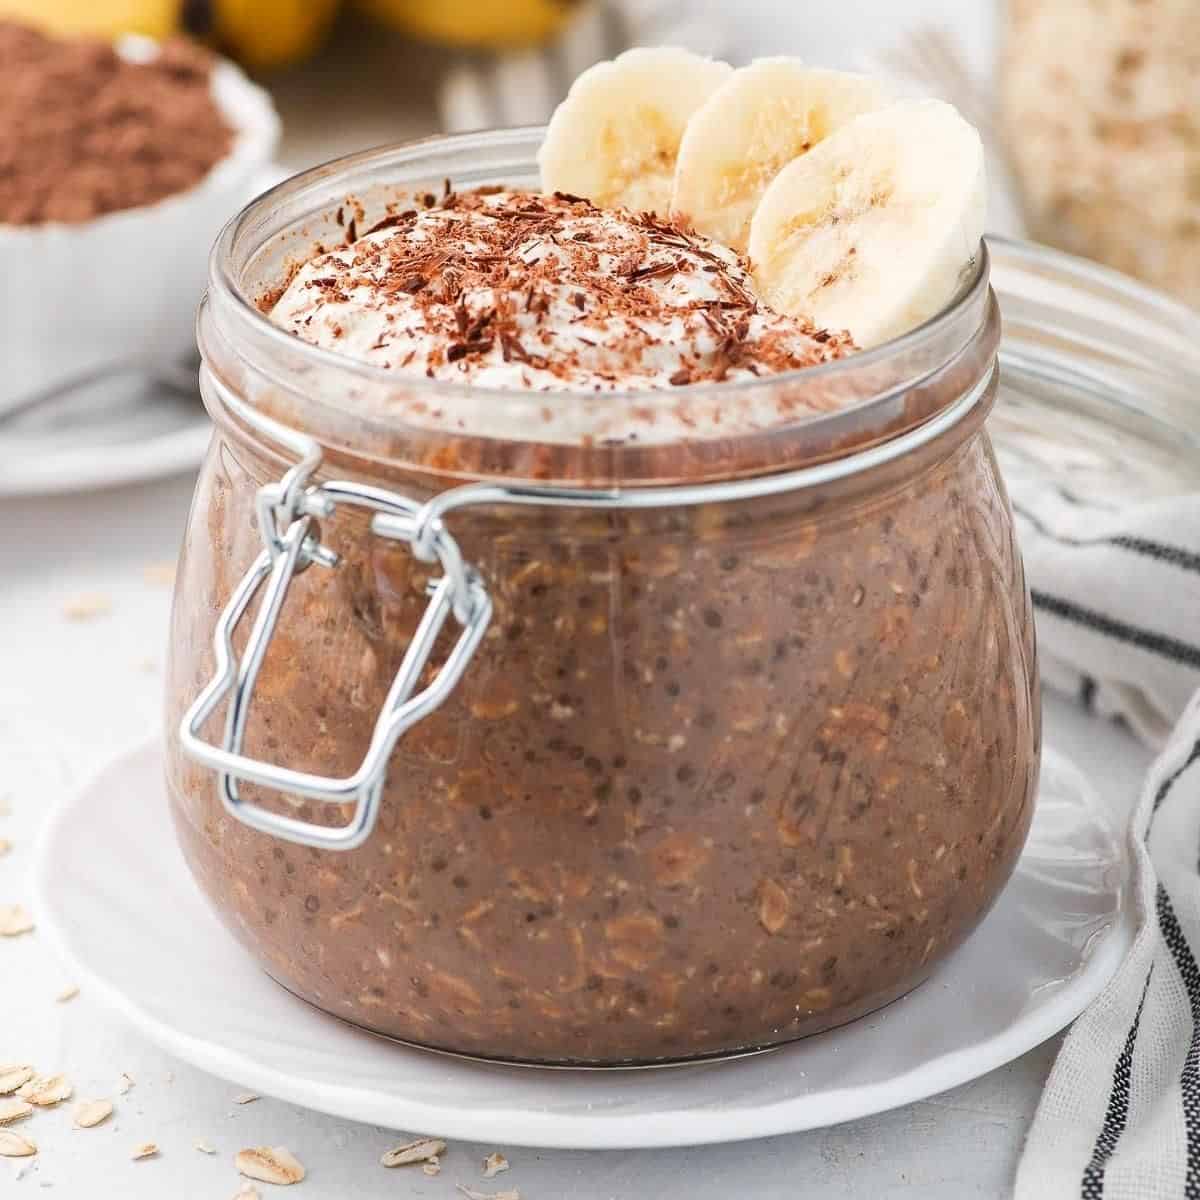 Jar of oats, topped with yoghurt, slices of banana and shaved chocolate.